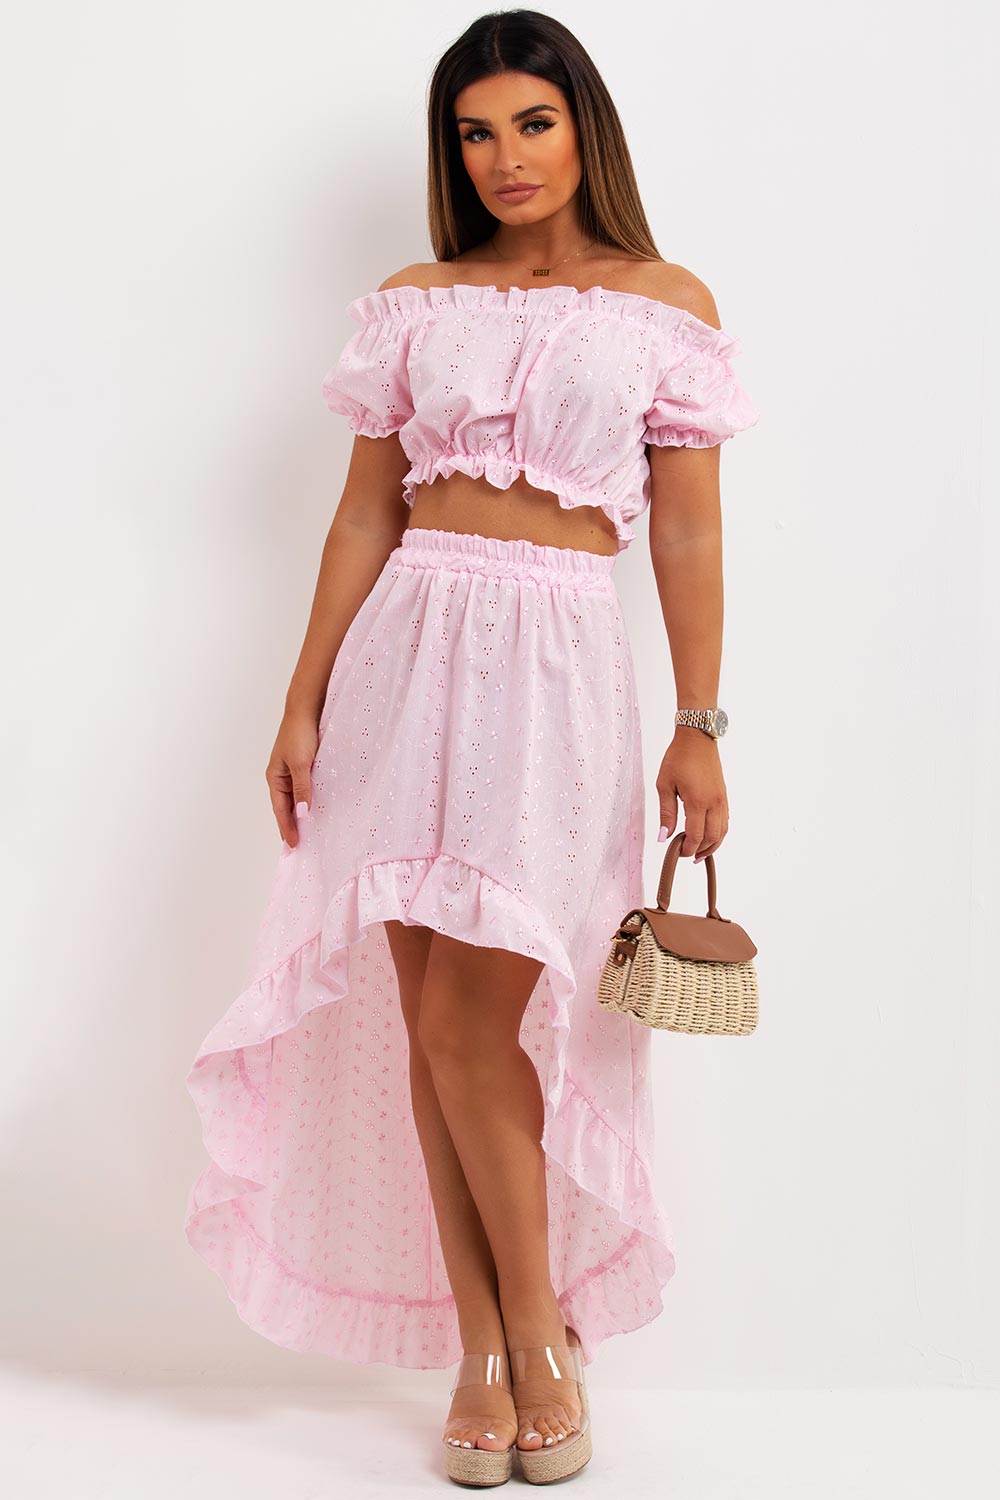 broderie anglaise ruffle frilly high low mullet skirt and top co ord set